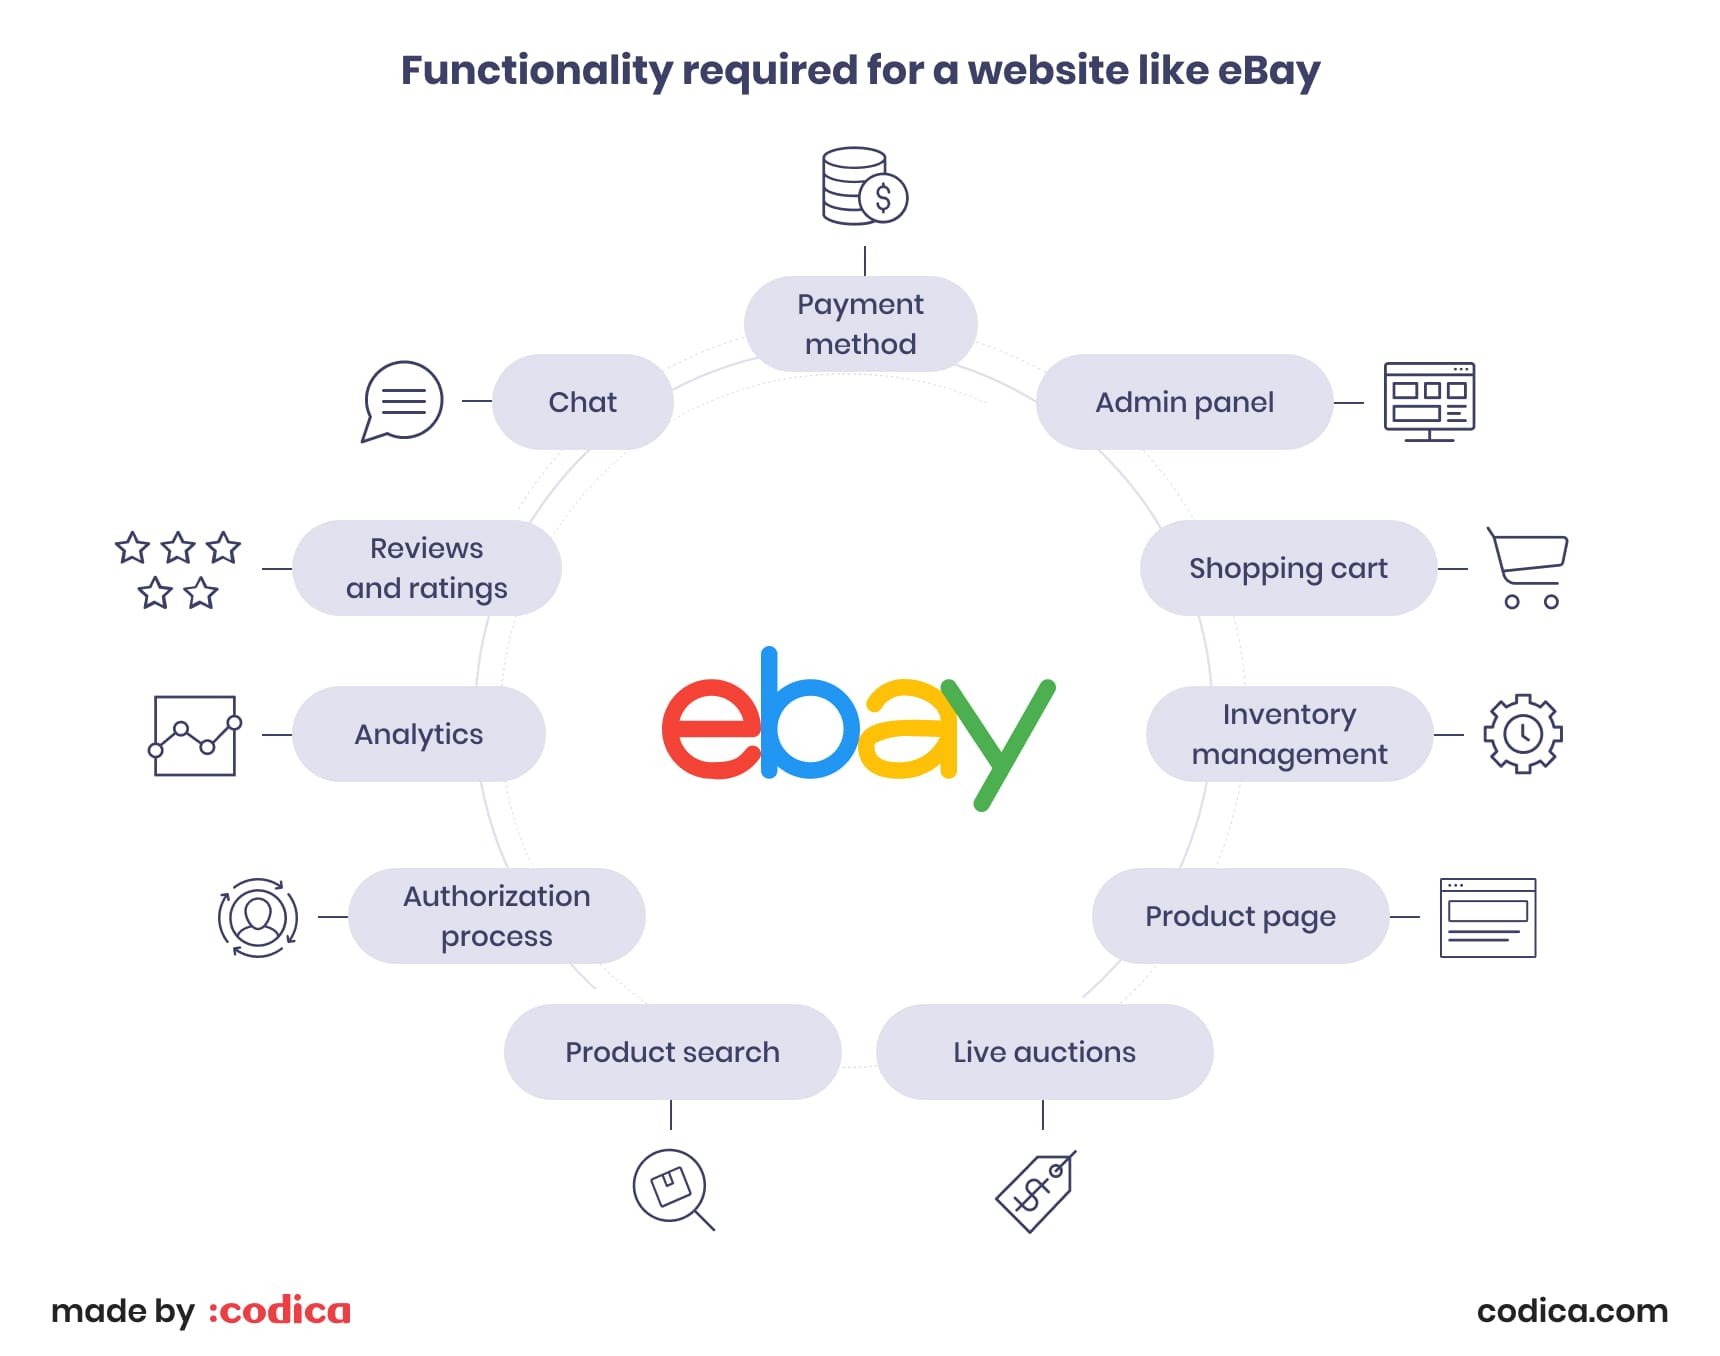 Basic functionality to be implemented in a marketplace